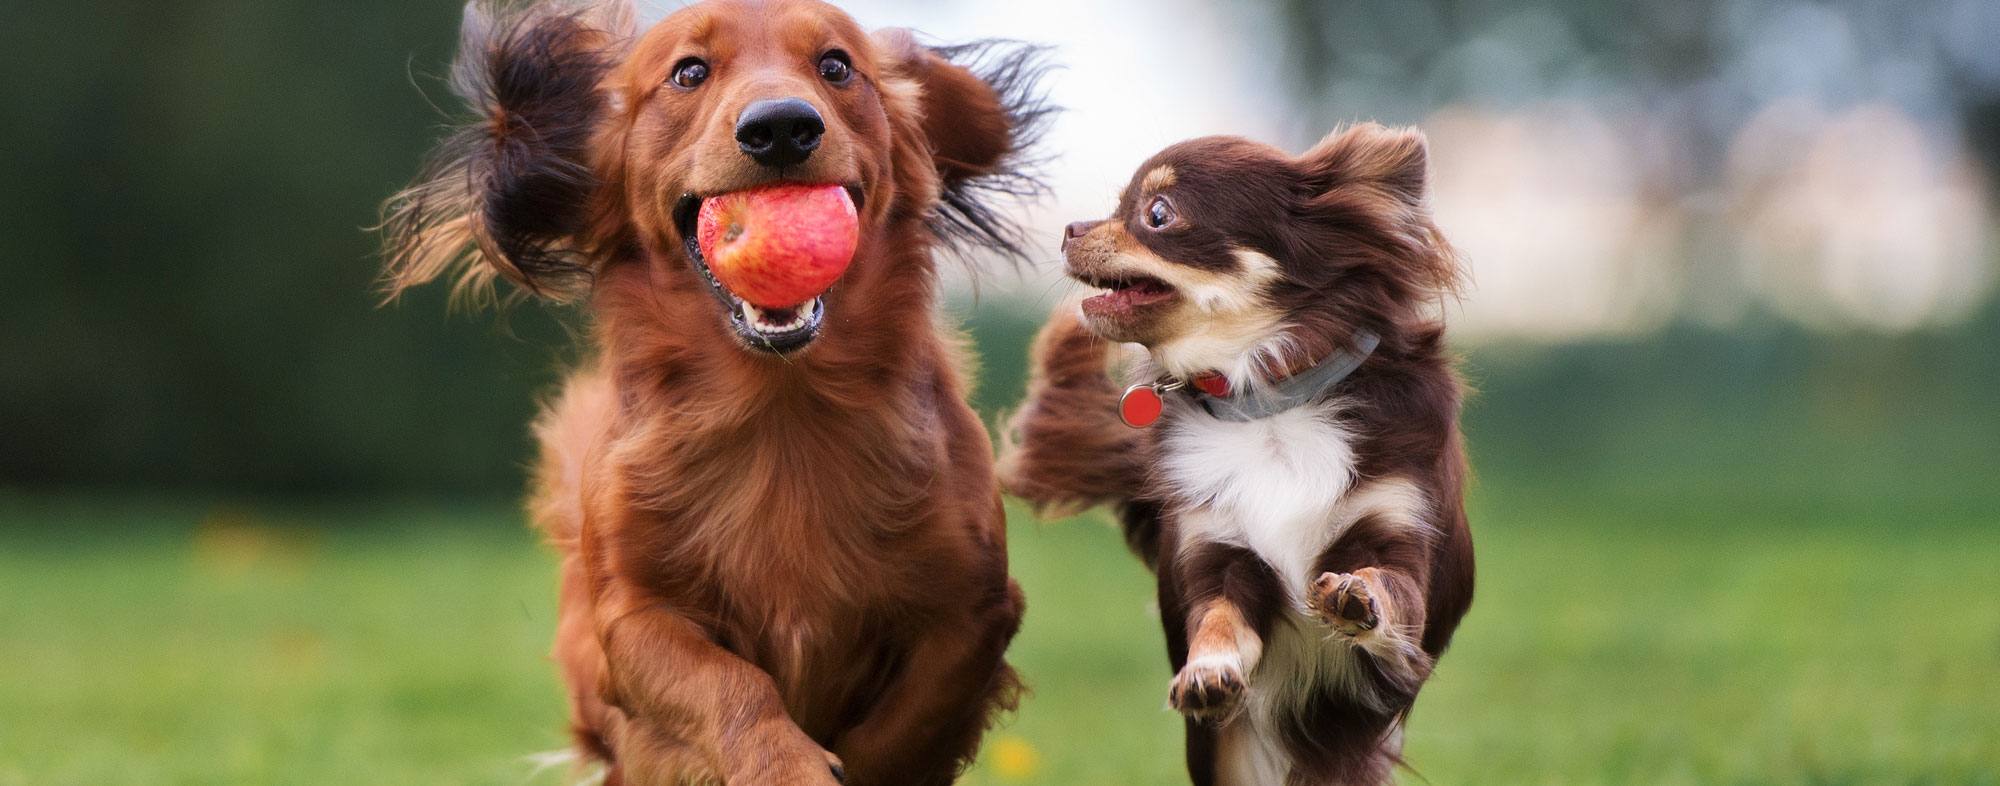 Pairing together similar breeds is how you can socialize your dog